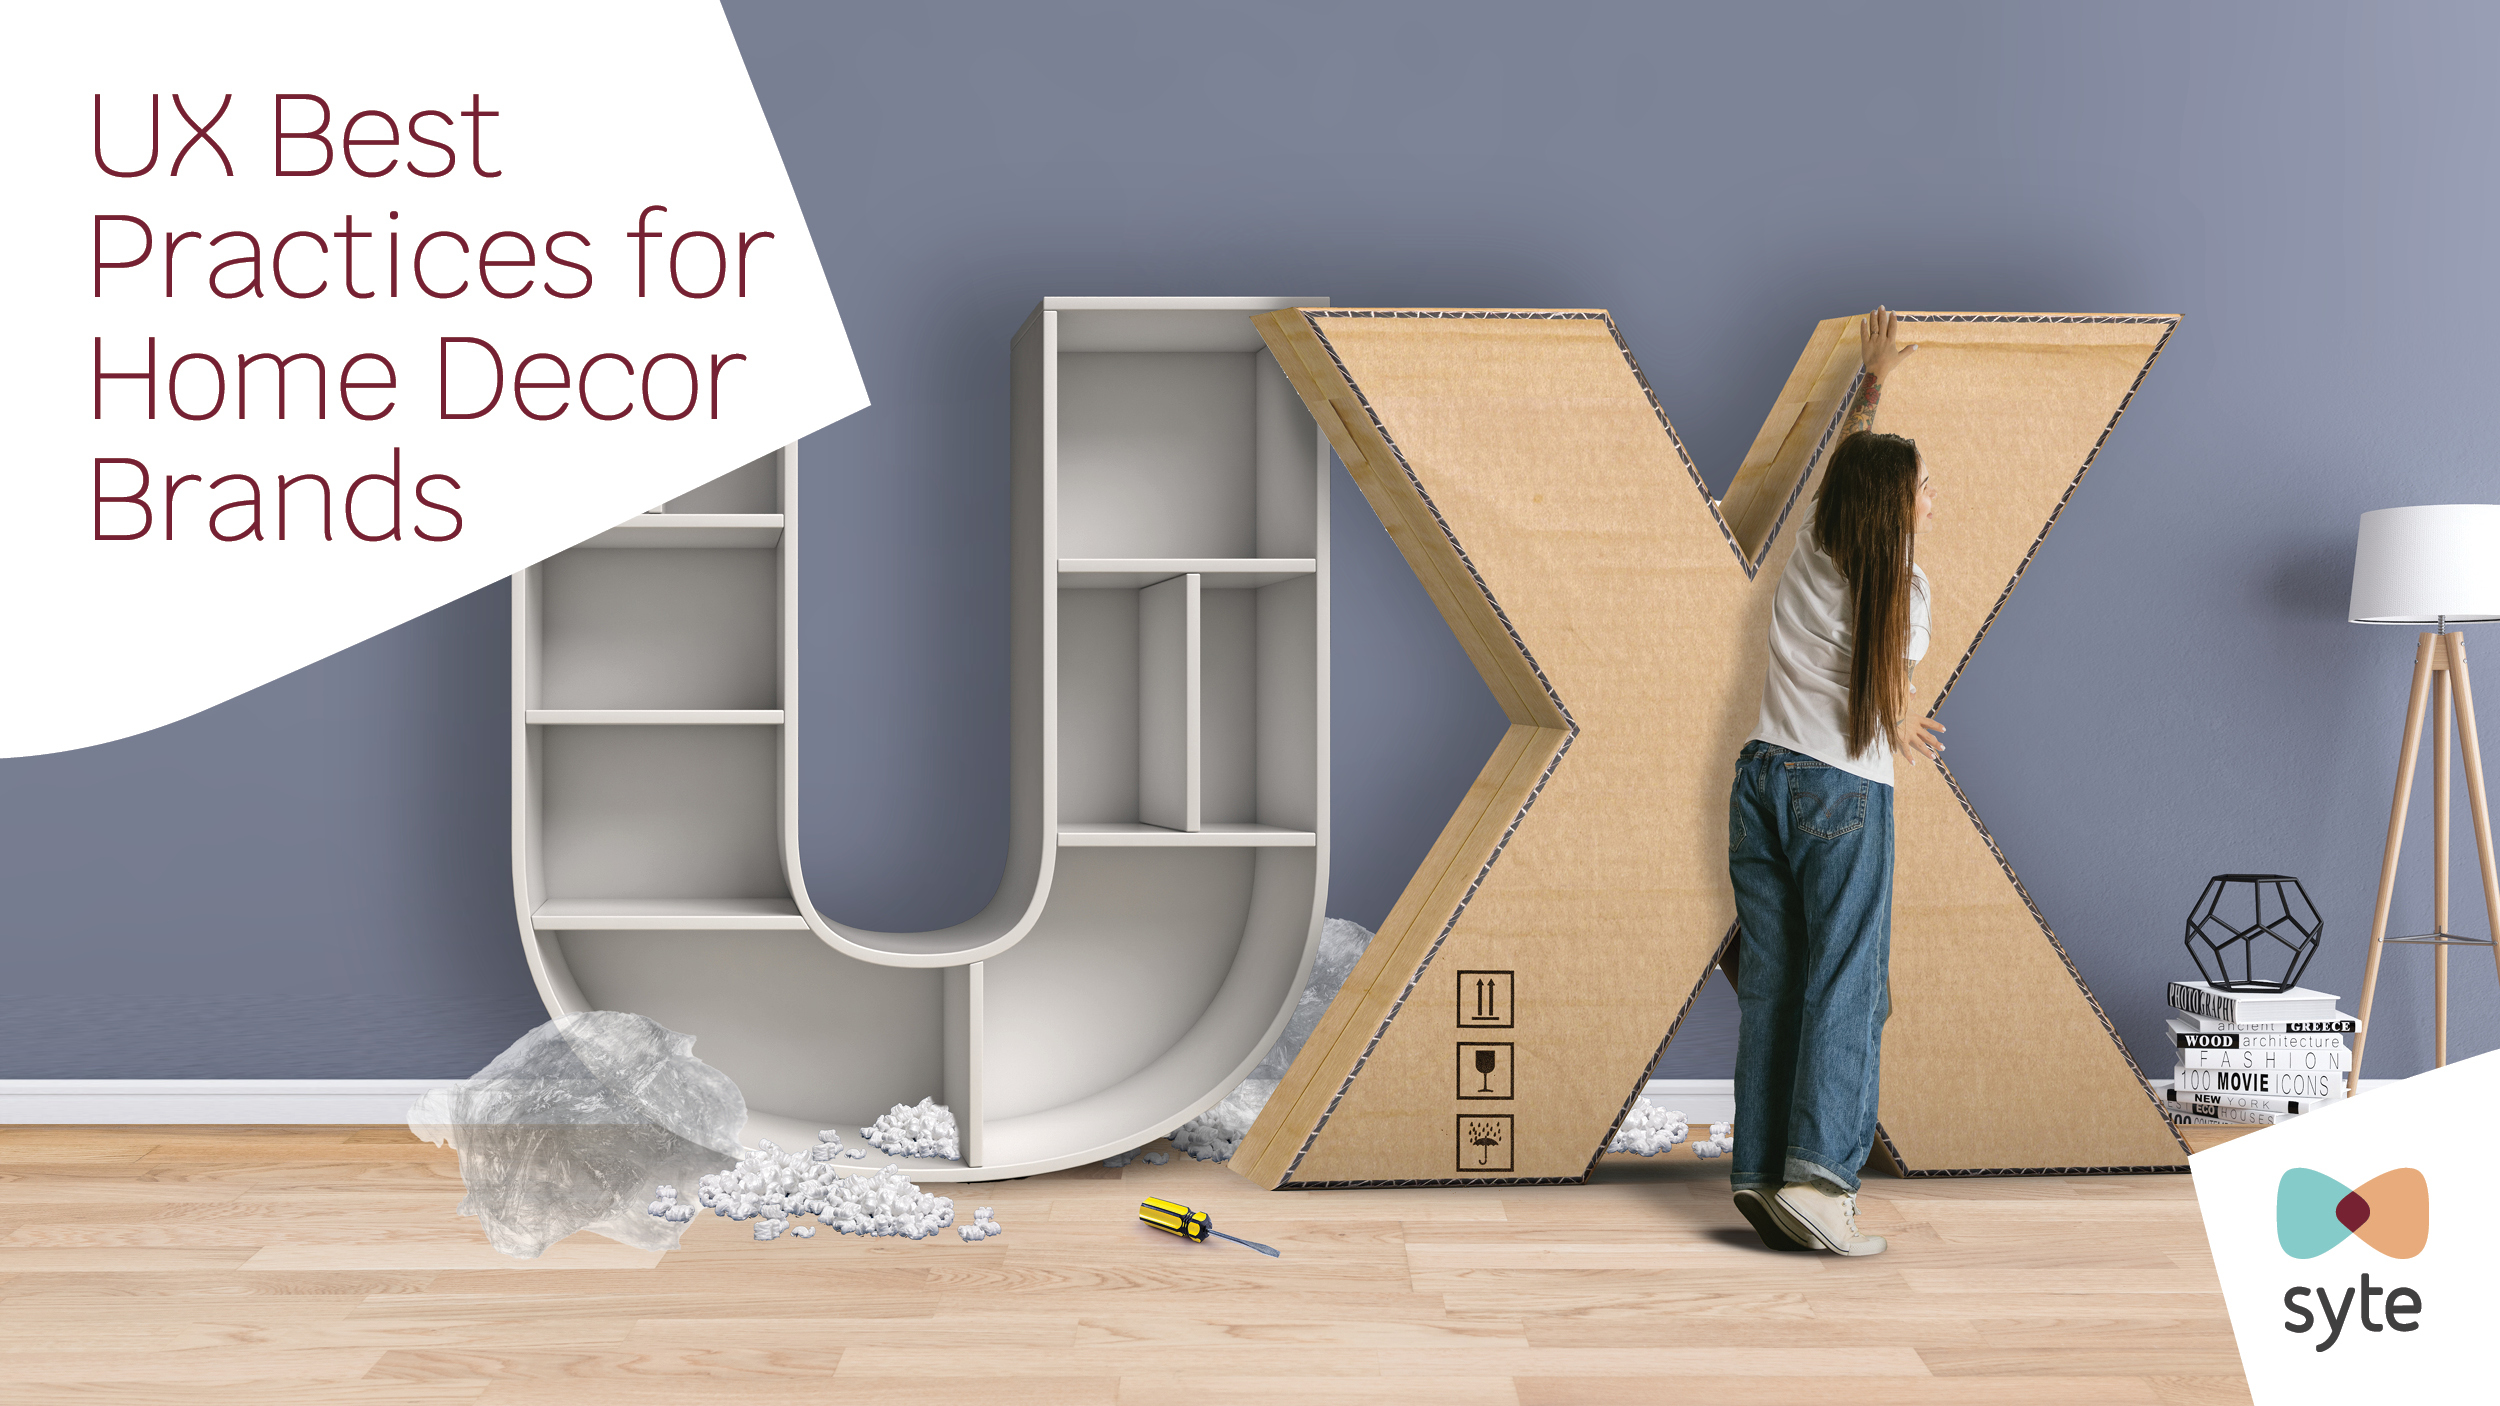 Home Decor Shoppers: How to Win Them Over With the Right UX